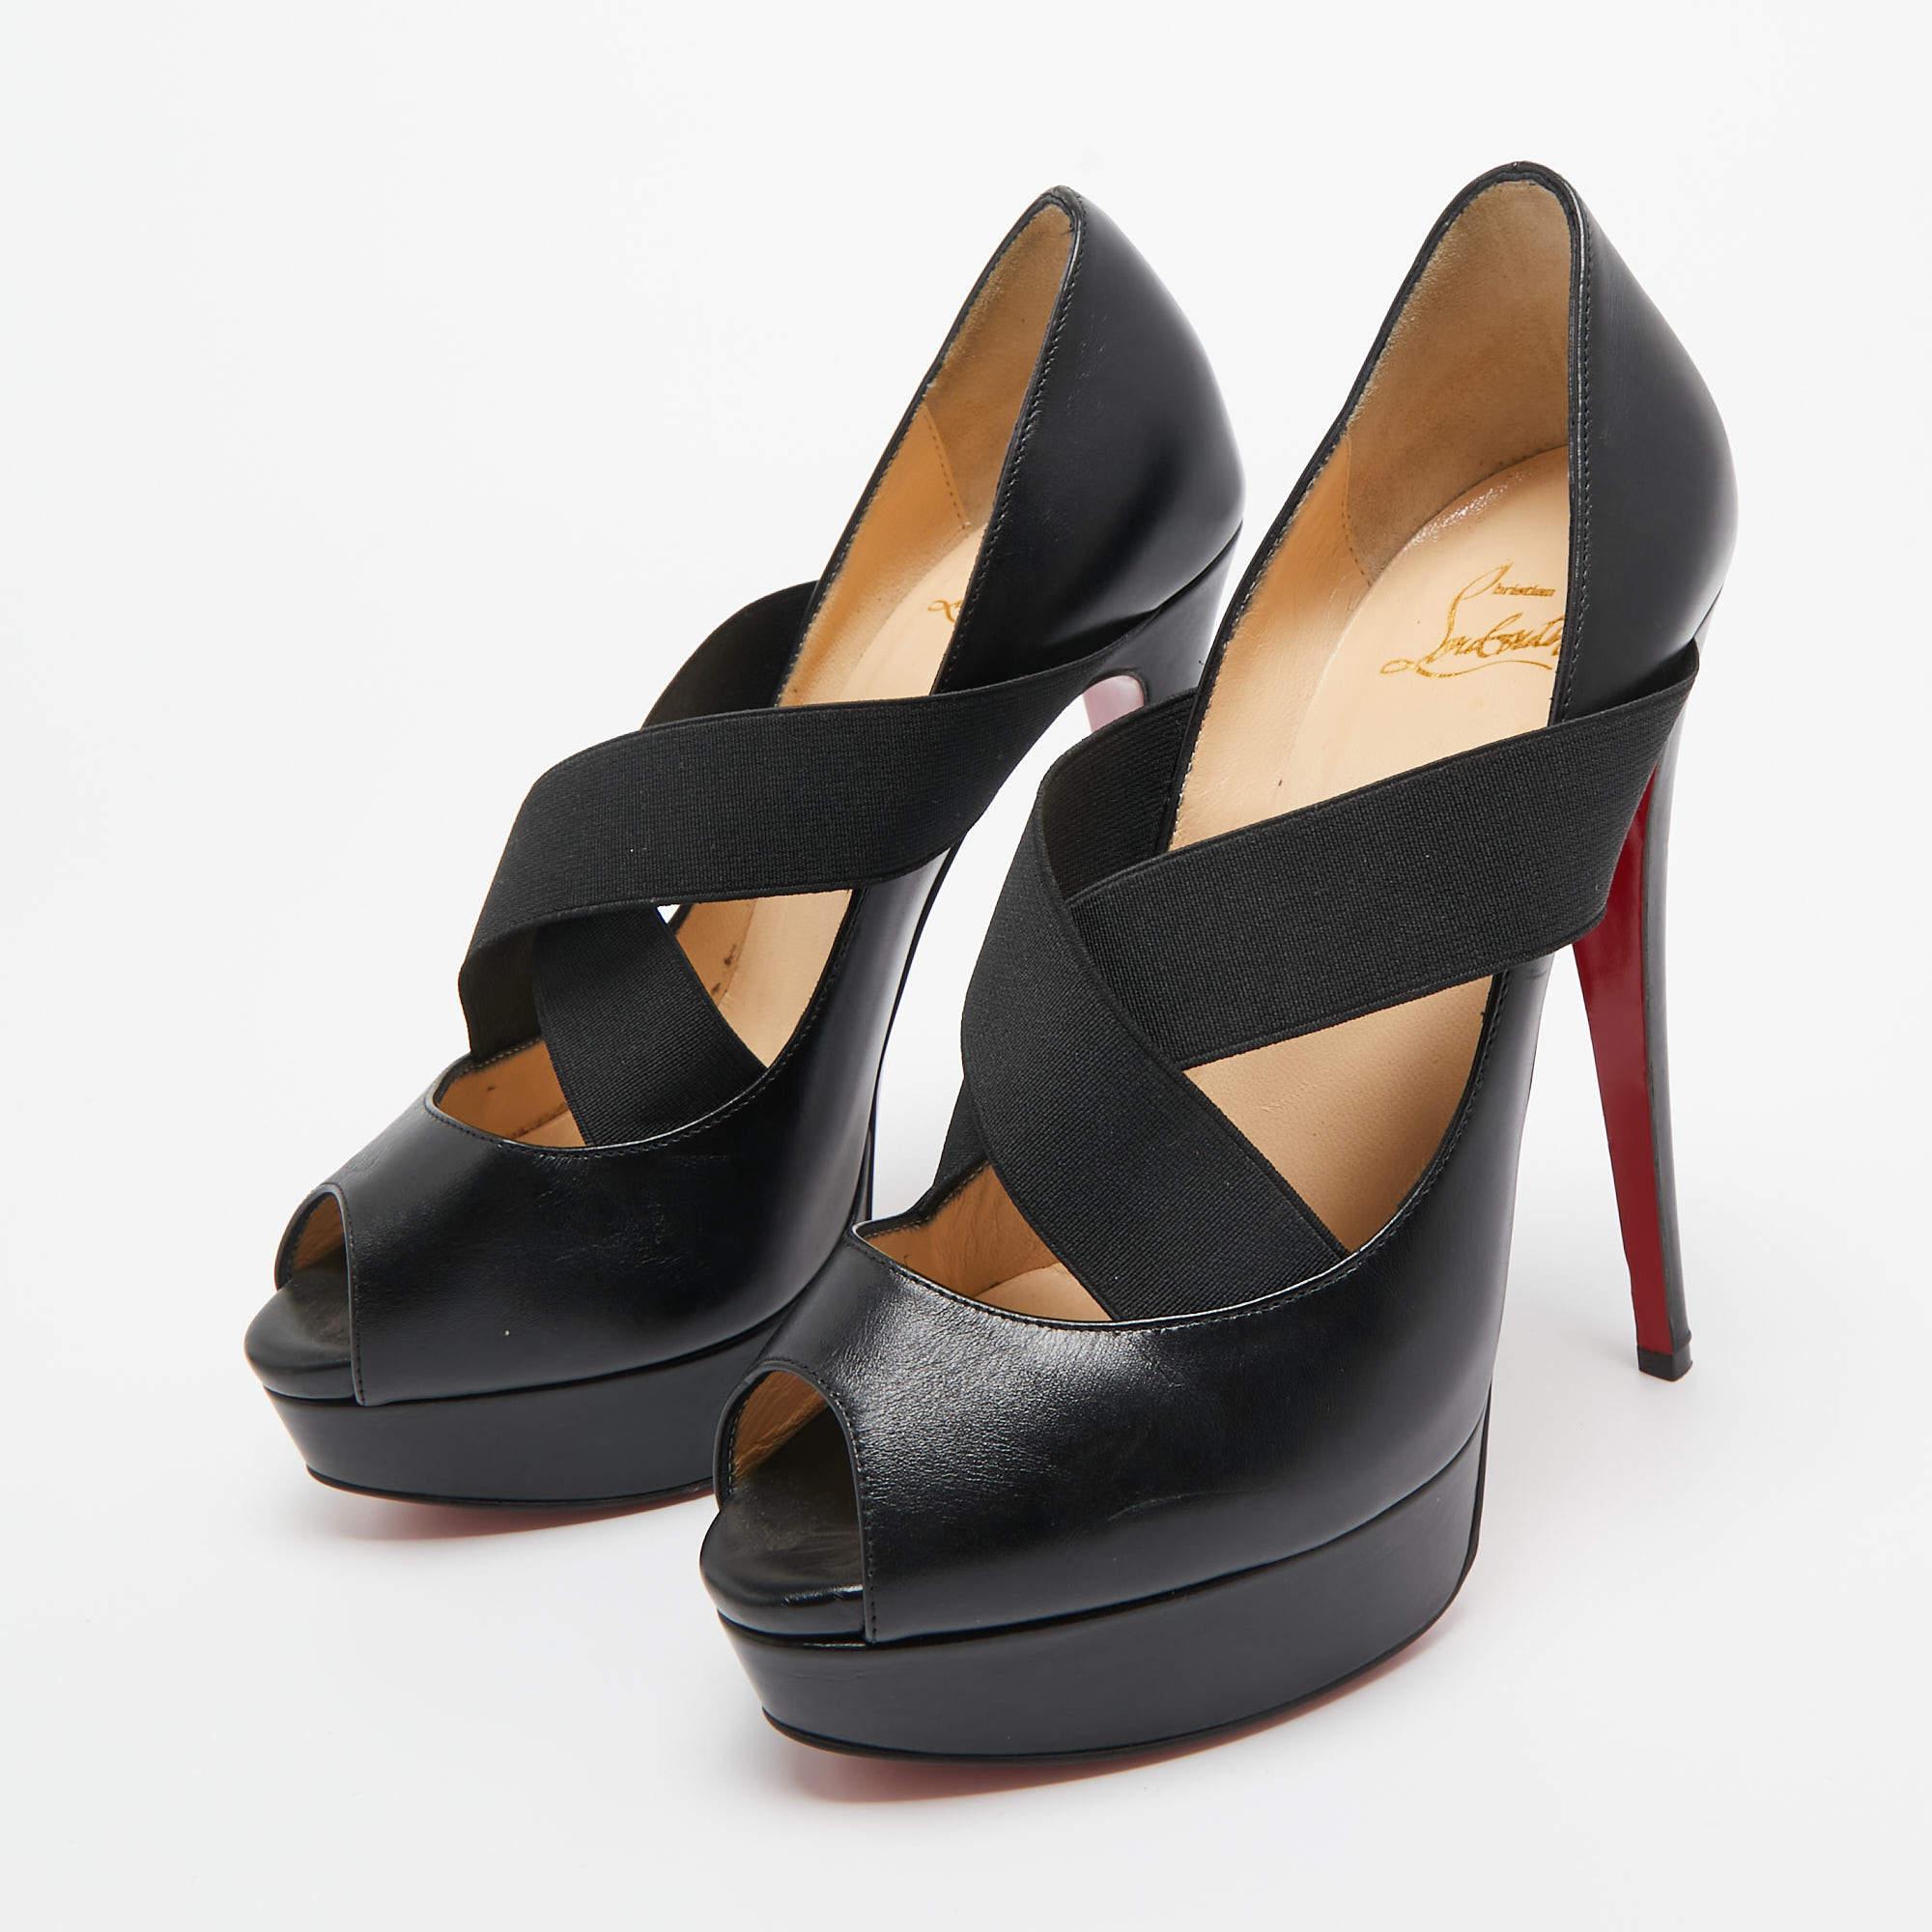 Christian Louboutin Black Leather and  Platform Peep Toe Pump Size 38.5 For Sale 3